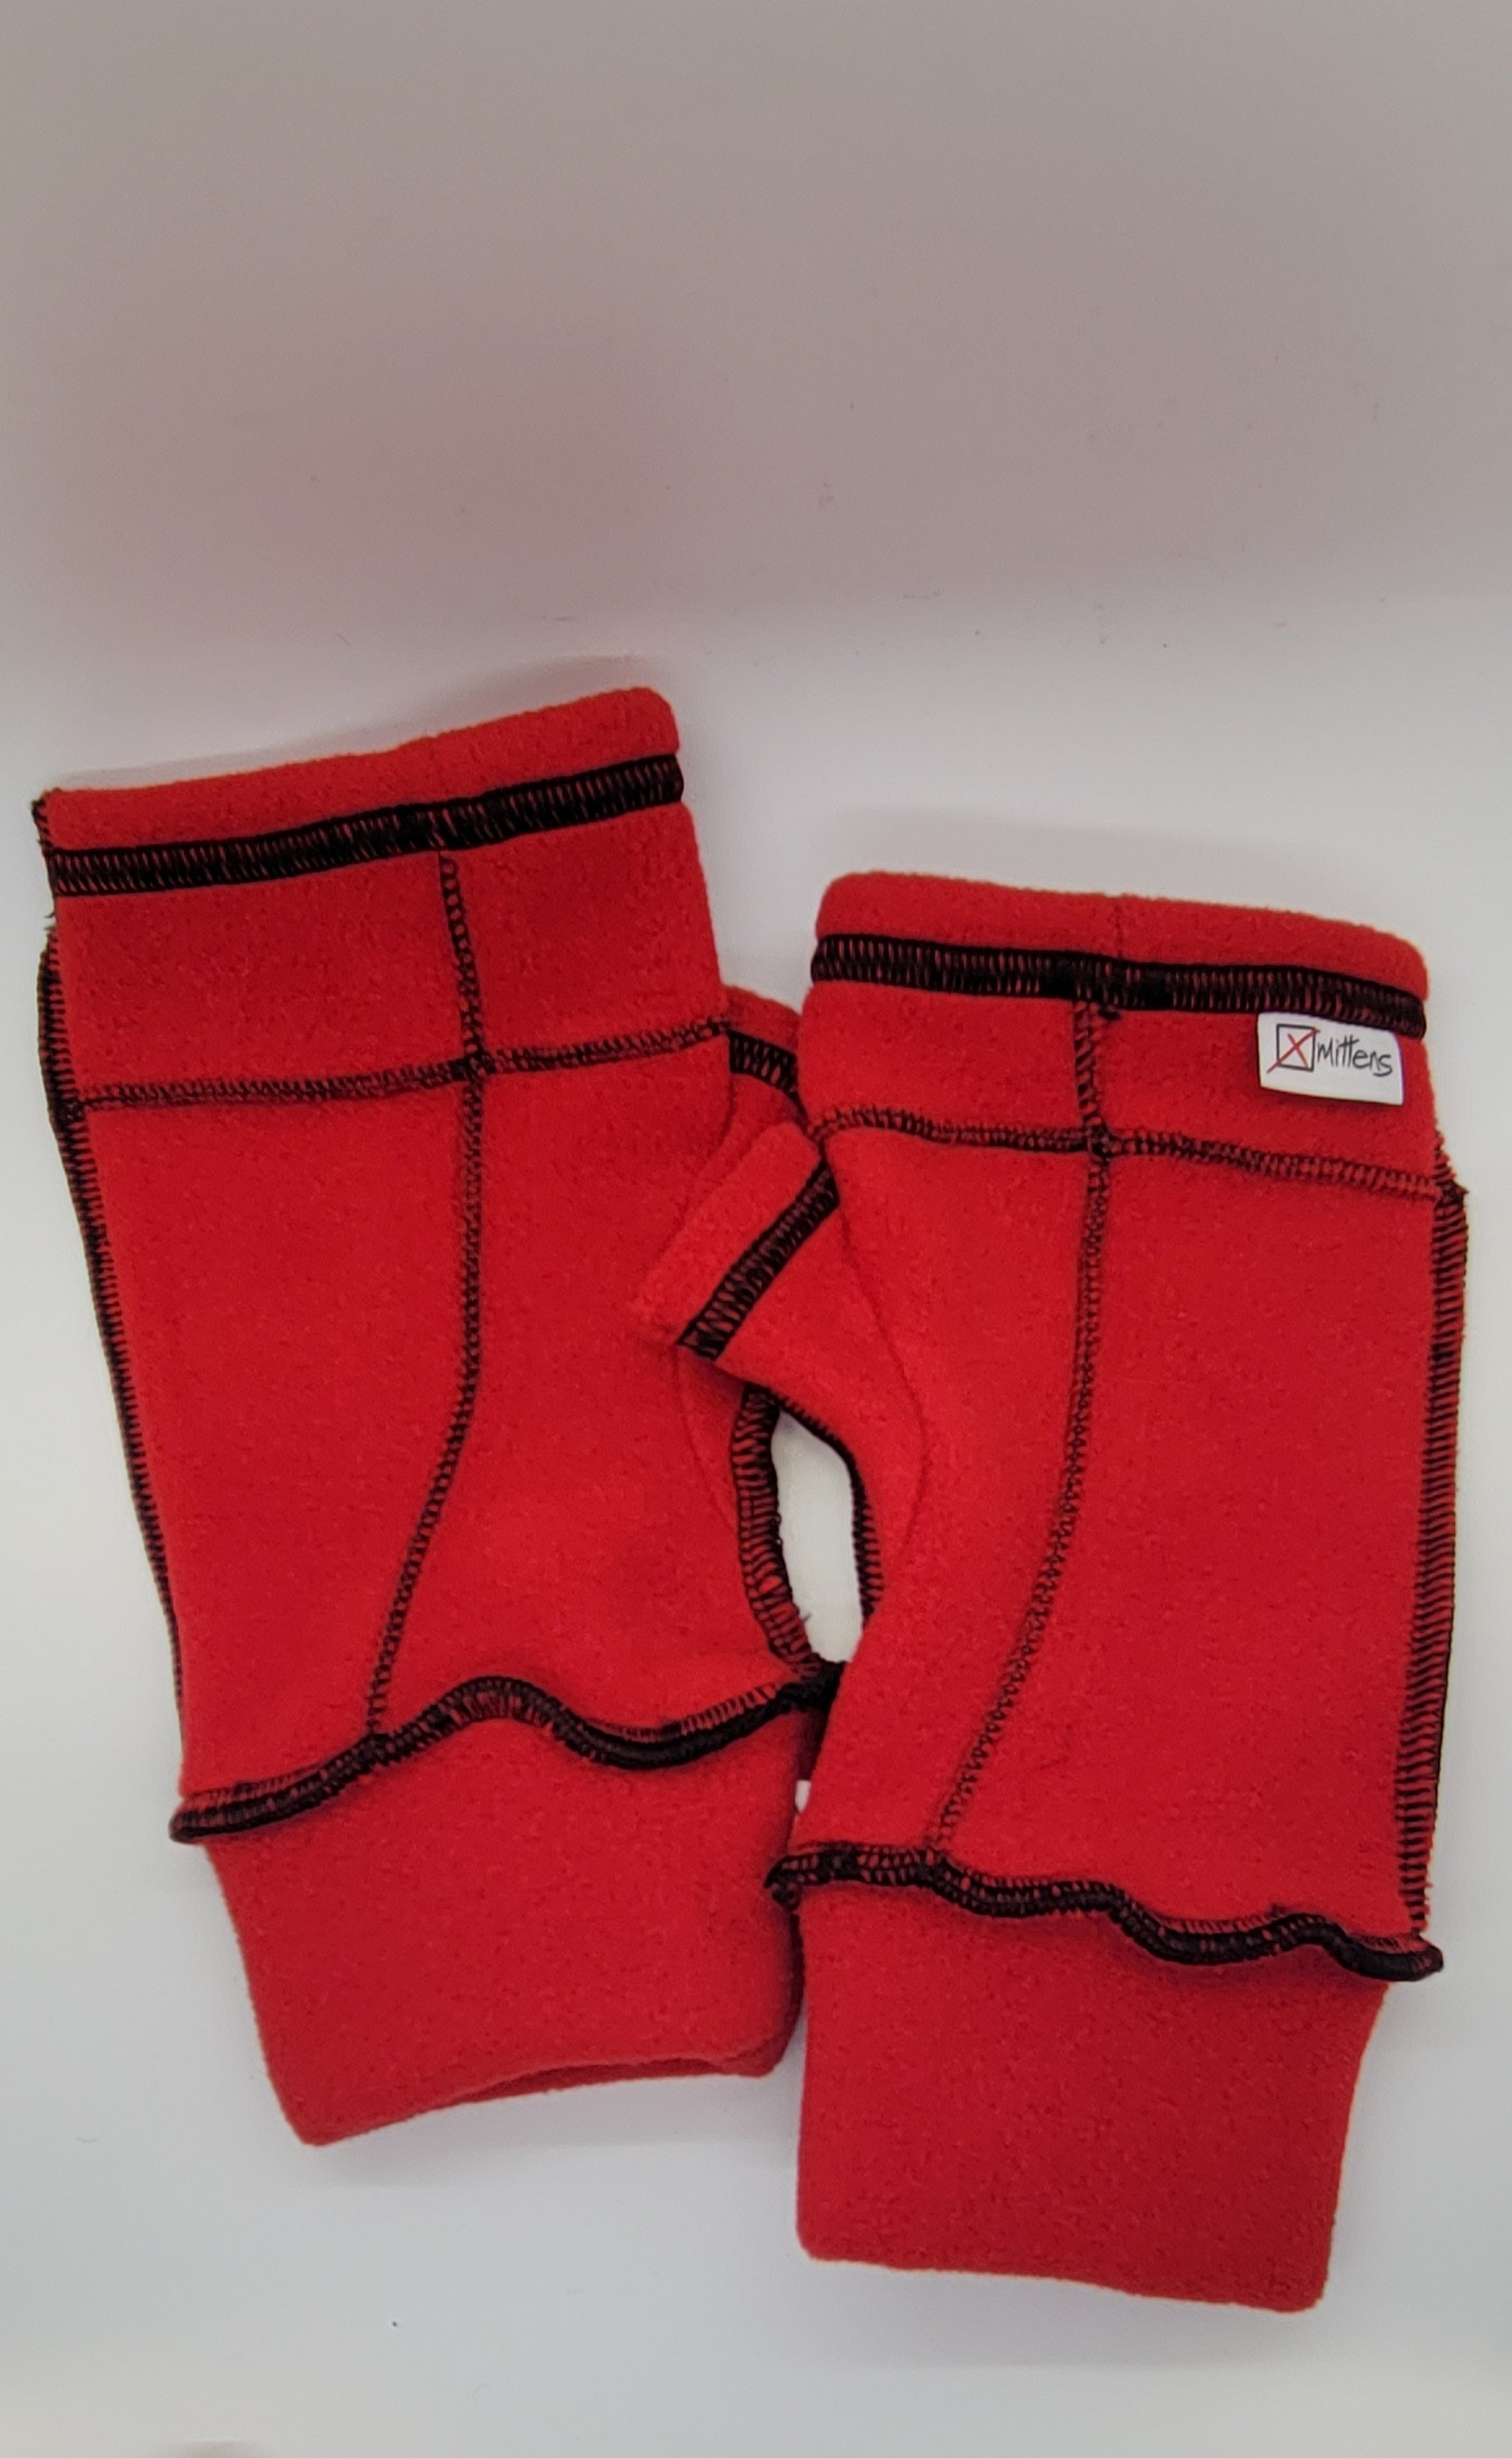 Cuffed Xmittens: Cherry Red with Black Thread